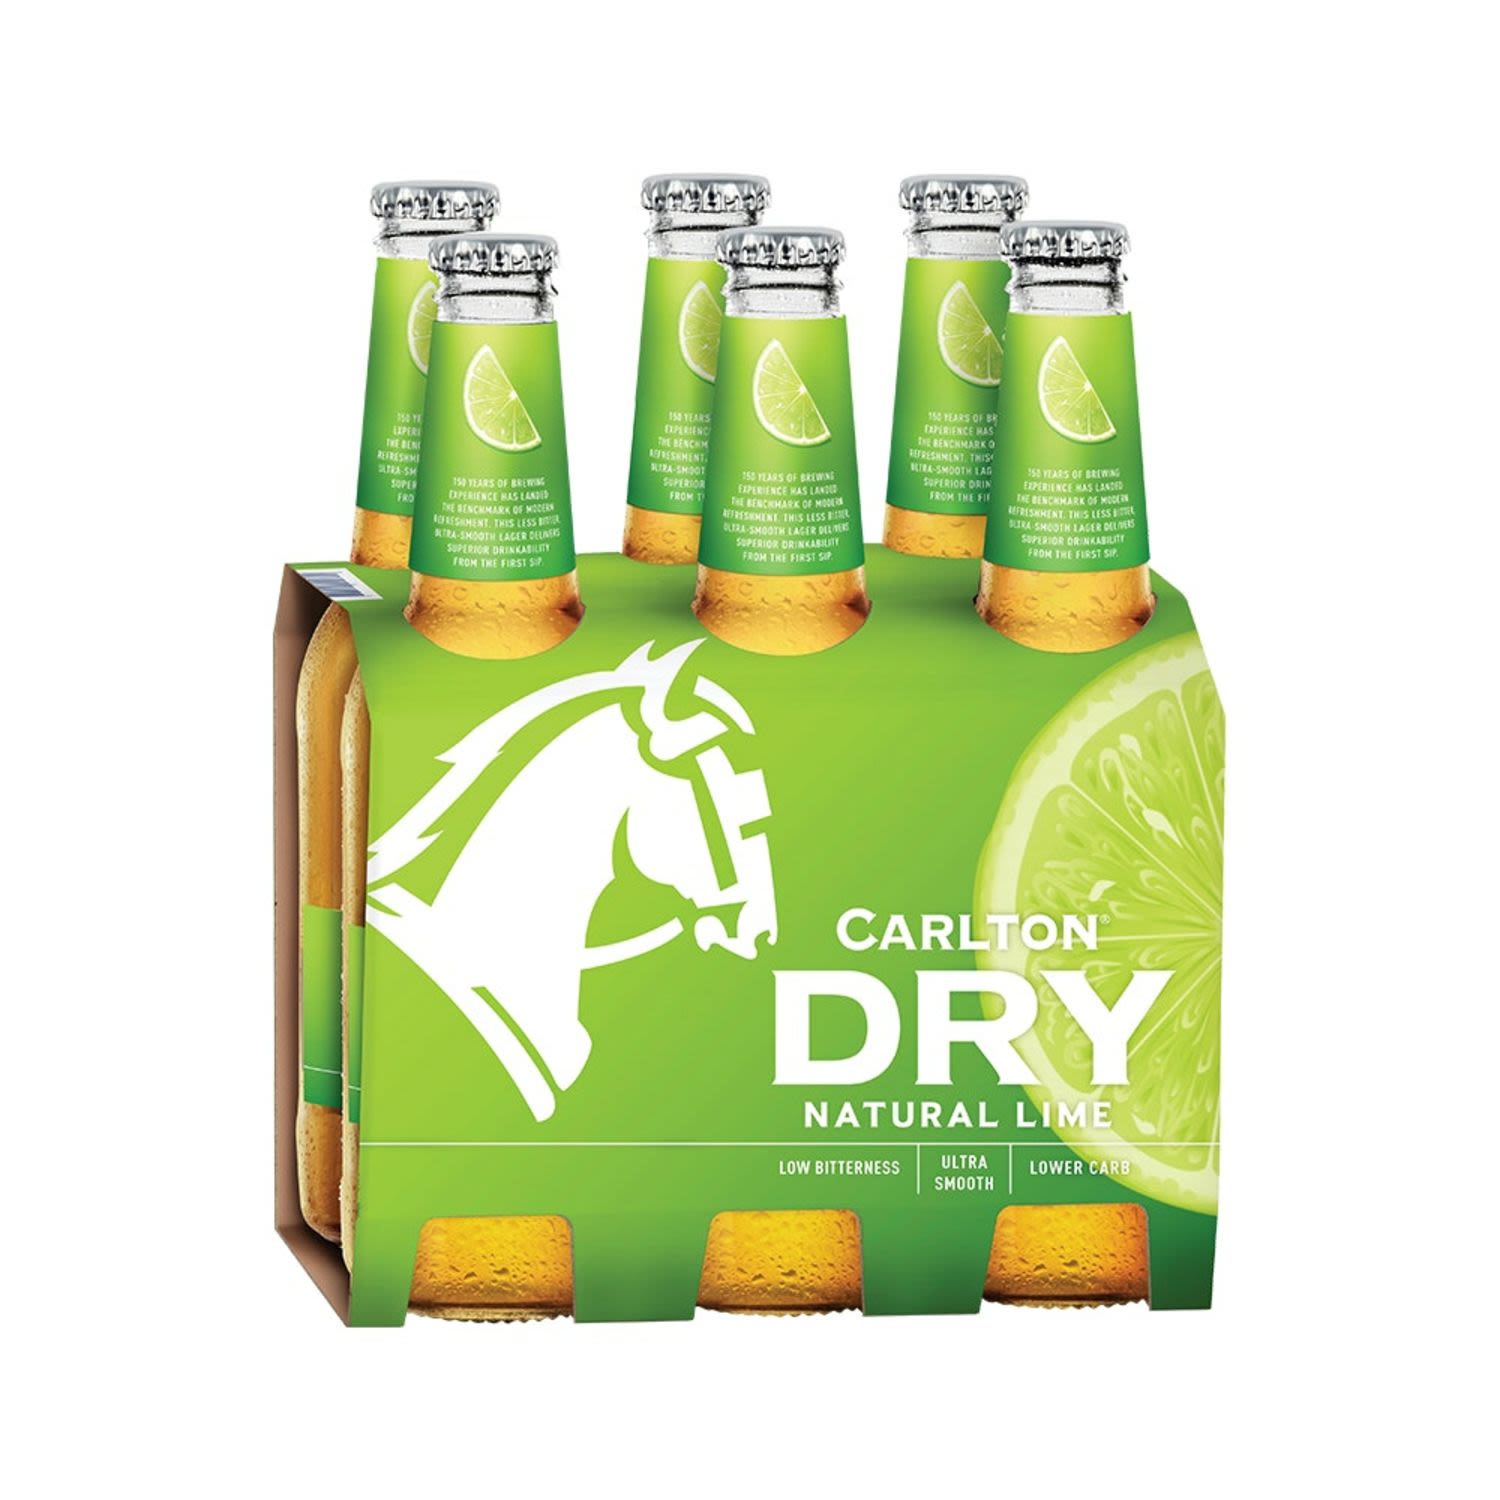 Carlton Dry Lime has the same great taste of Carlton Dry Beer yet with an extra edge of natural lime to ensure a refreshing zip from start to finish.<br /> <br />Alcohol Volume: 4.00%<br /><br />Pack Format: 6 Pack<br /><br />Standard Drinks: 1<br /><br />Pack Type: Bottle<br /><br />Country of Origin: Australia<br />